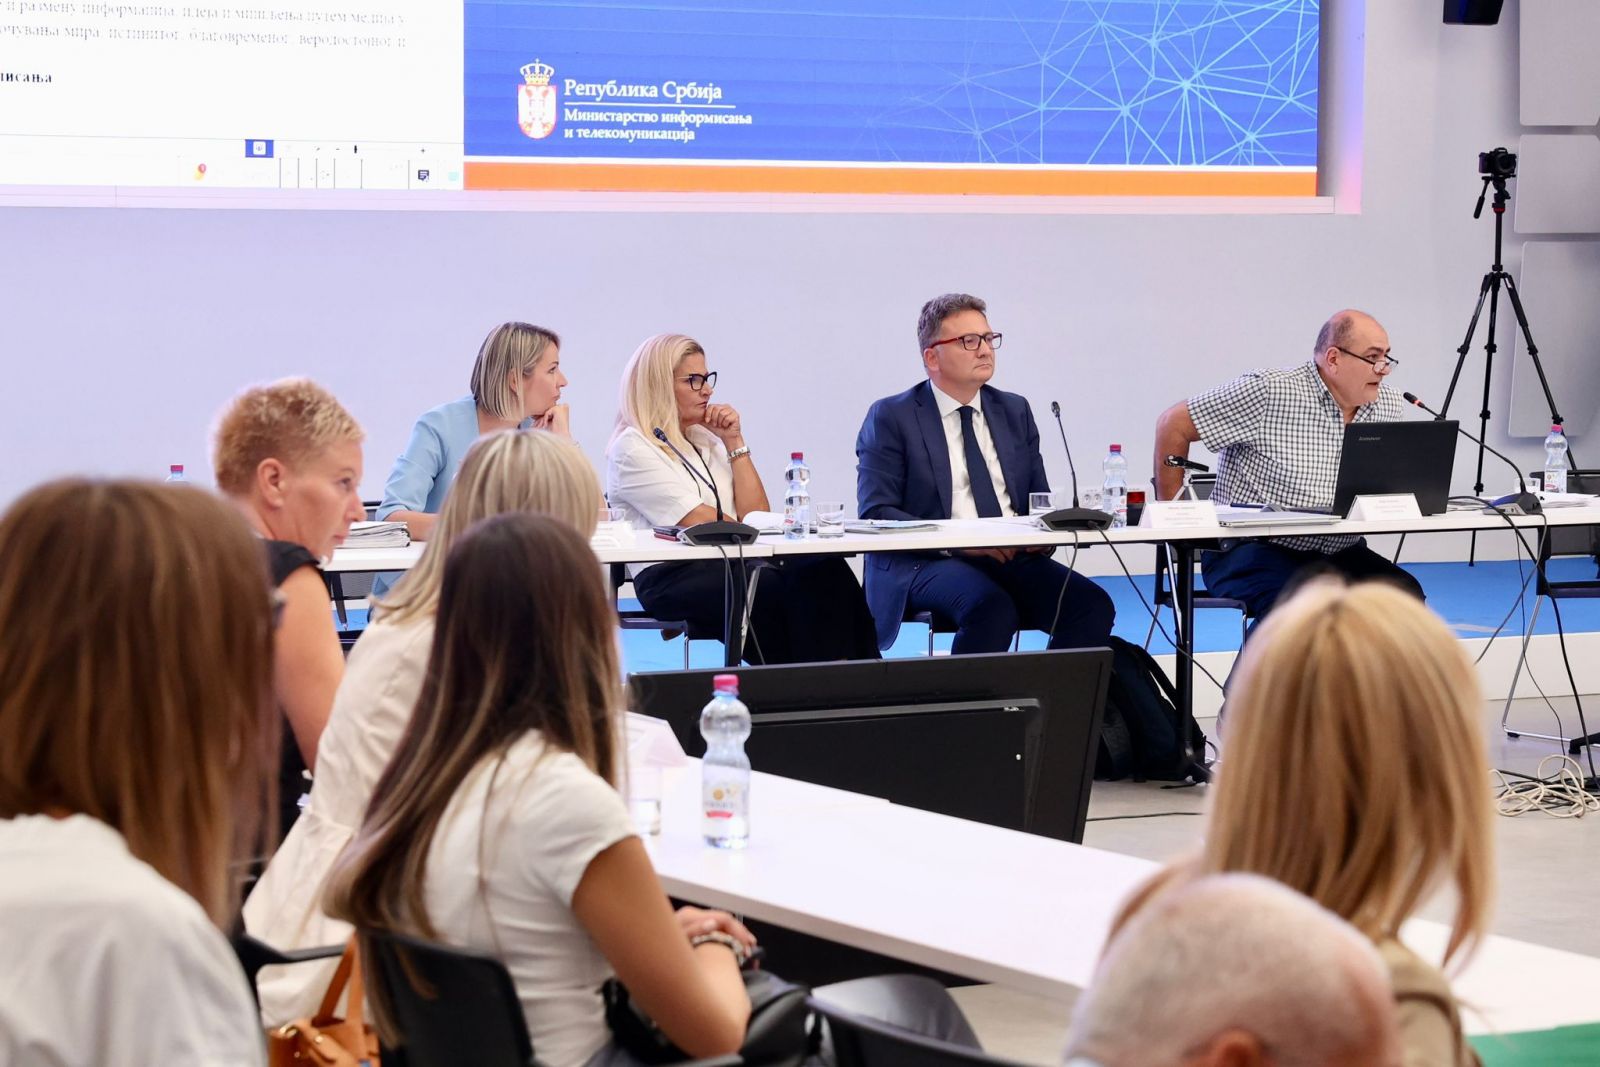 The first round table was held as part of the public debate on the Draft Law on Public Information and Media and the Draft Law on Electronic Media